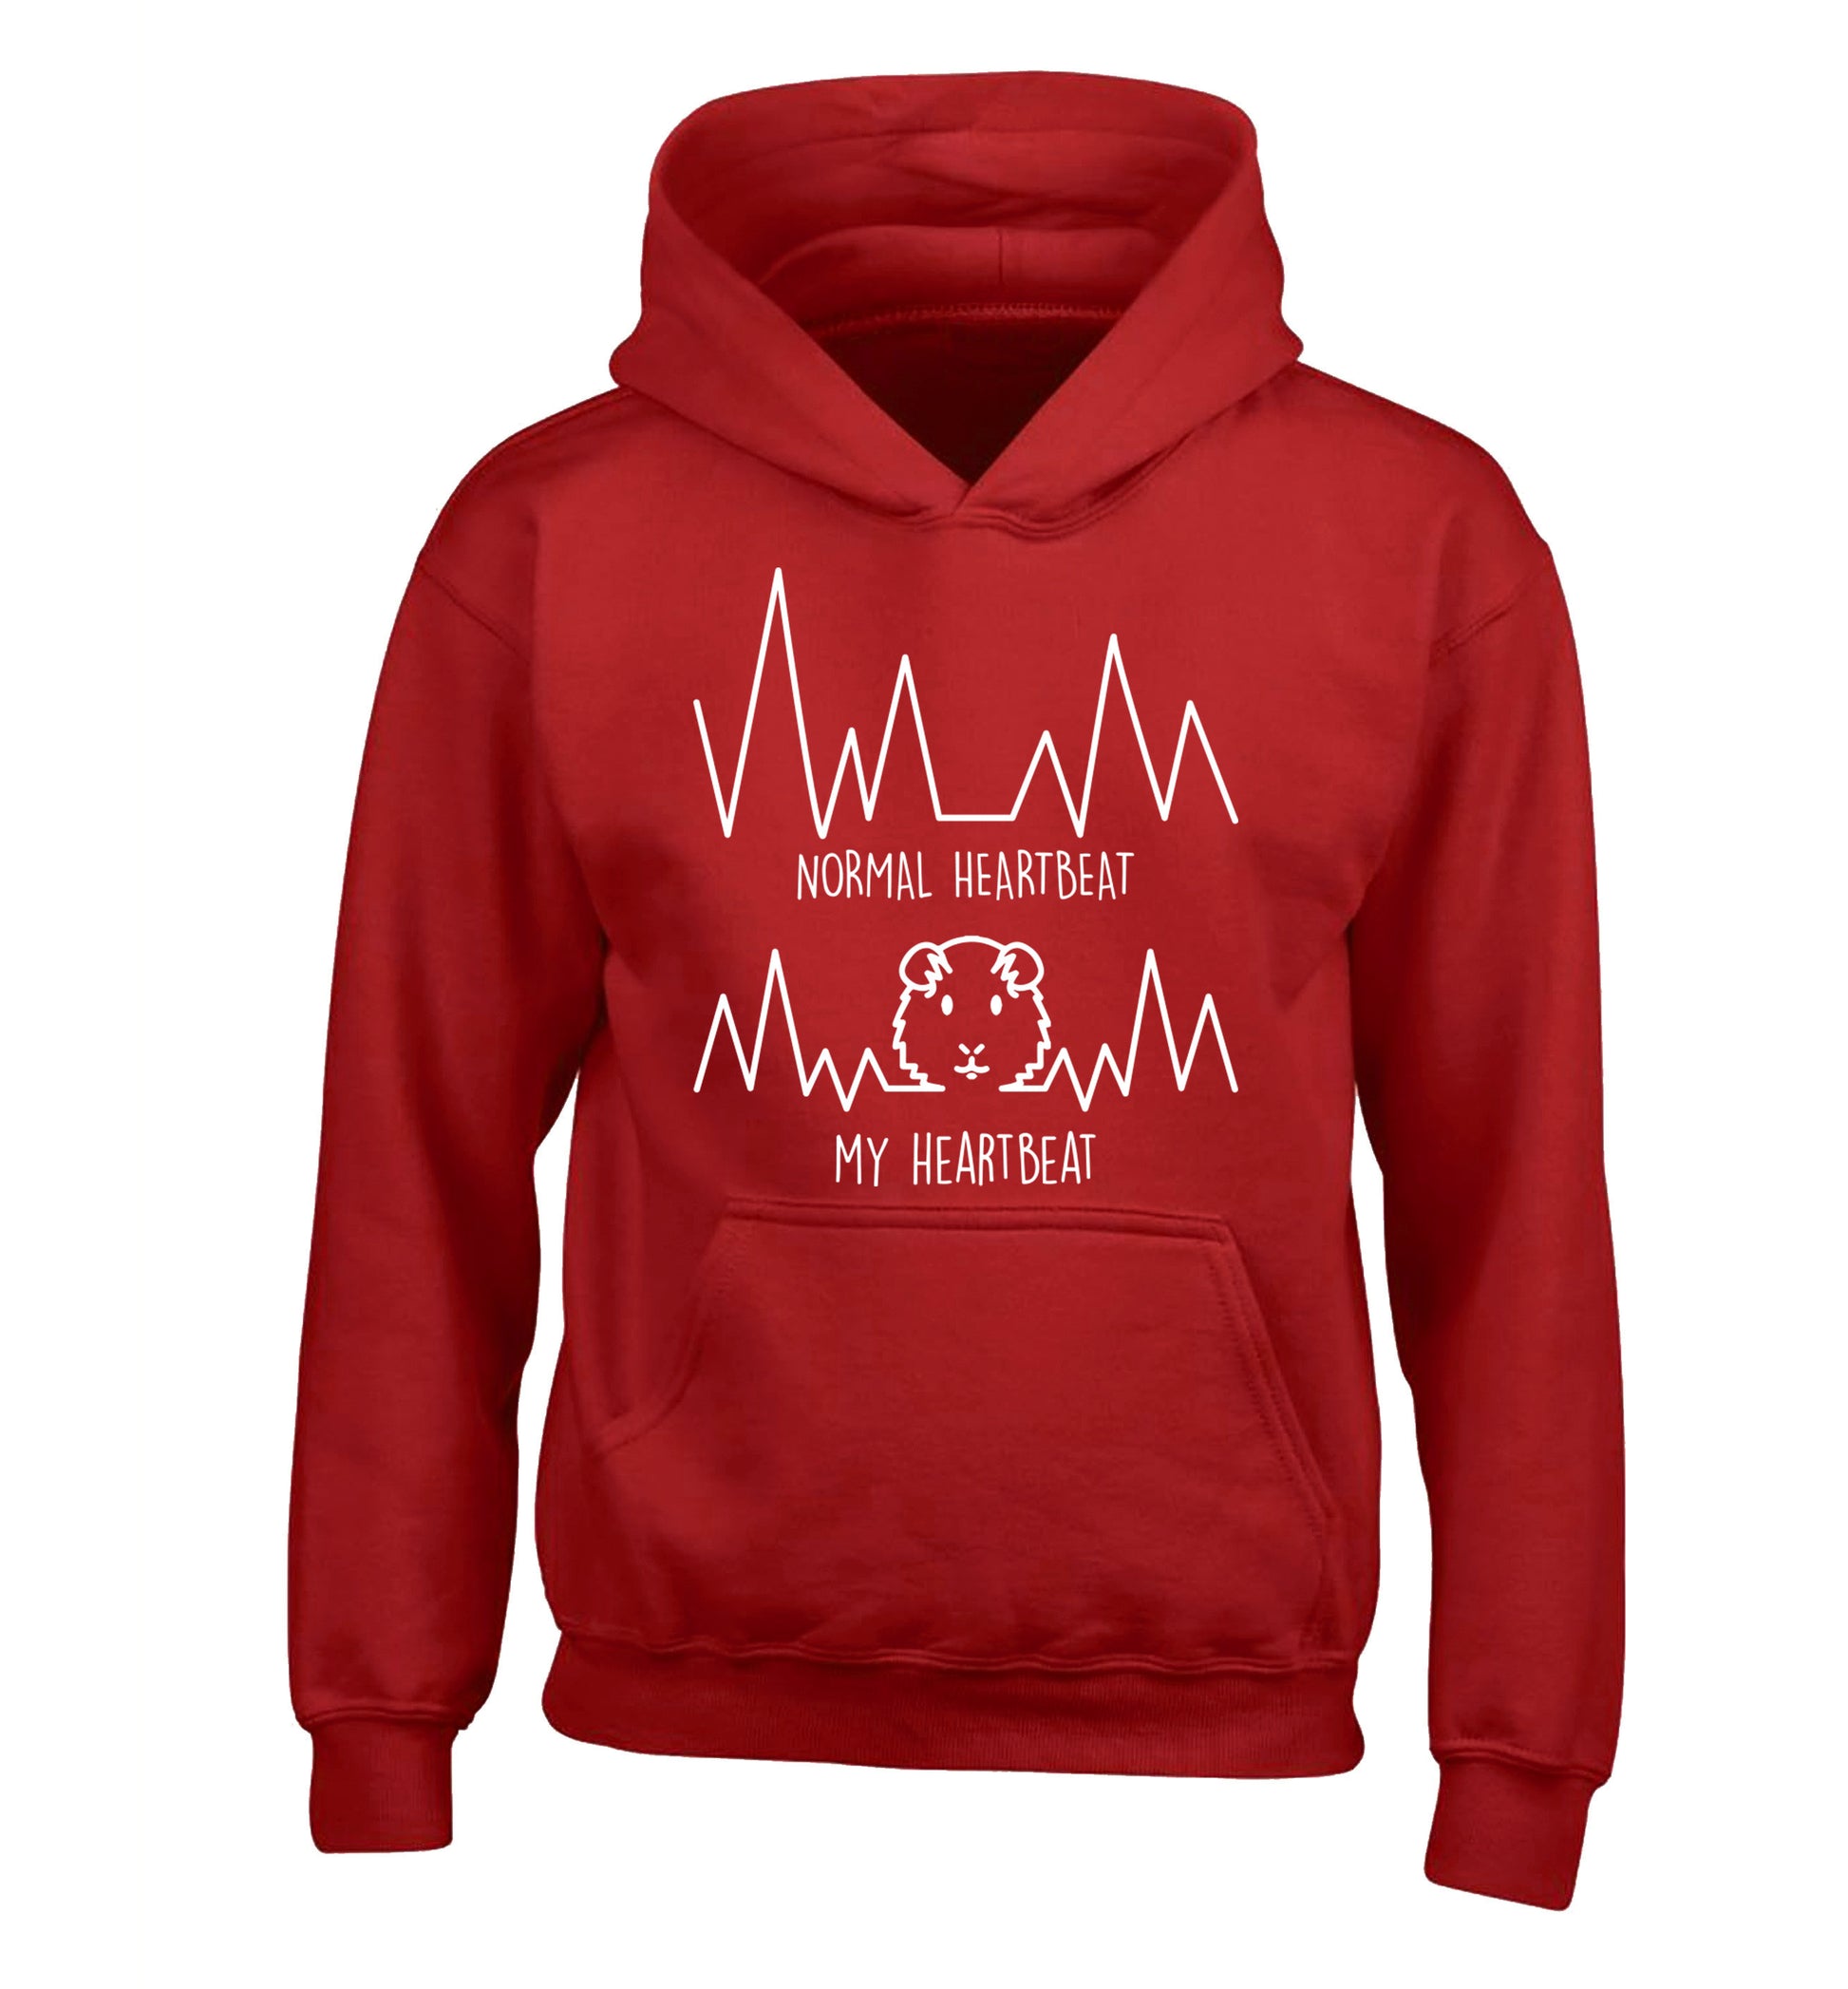 Normal heartbeat vs my heartbeat guinea pig lover children's red hoodie 12-14 Years